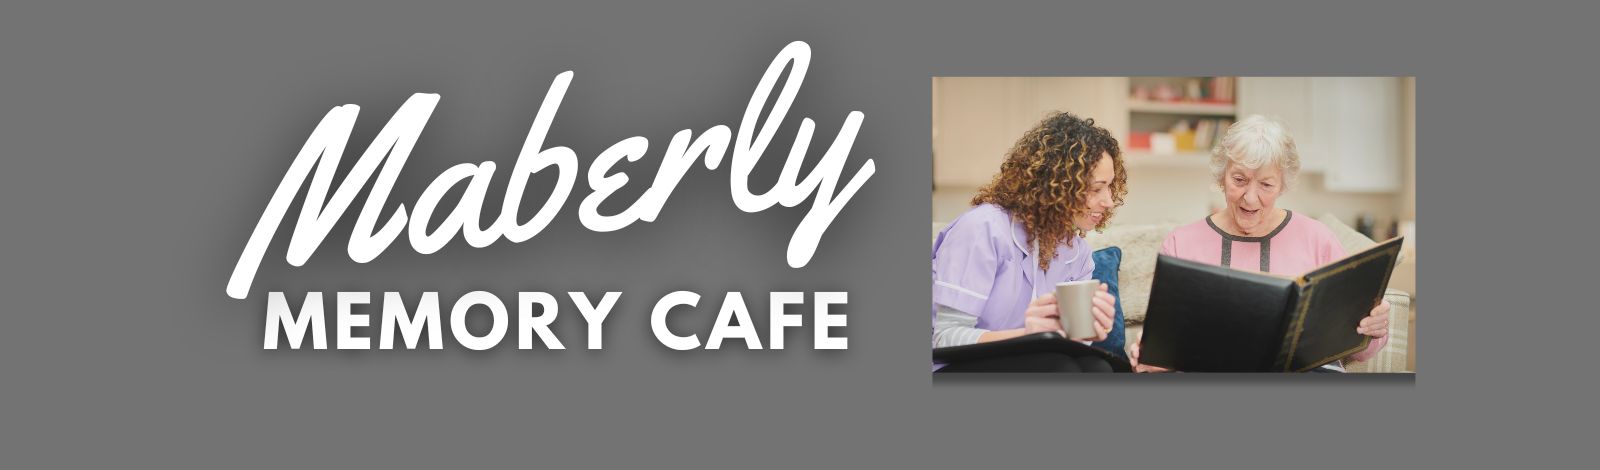 Maberly Memory Cafe Banner